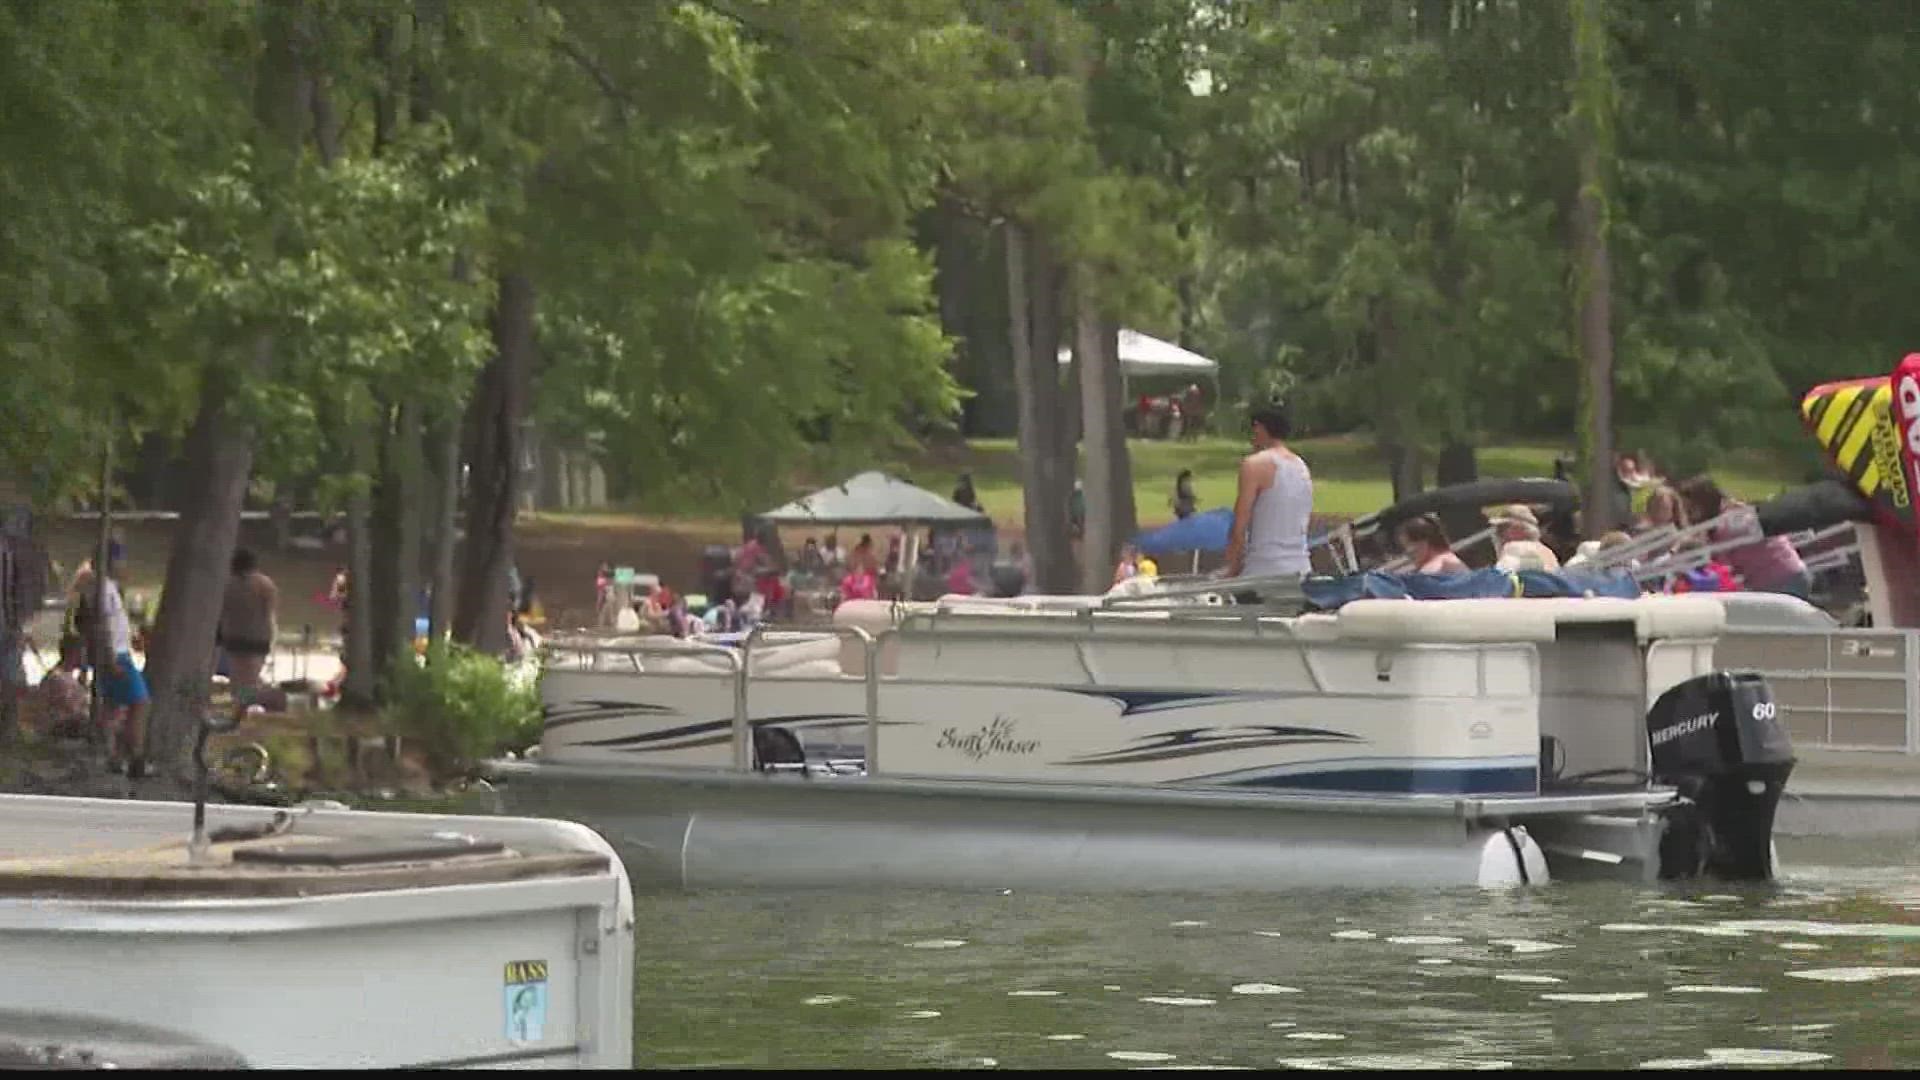 Three people drowned in Lake Lanier in the same seven-day period, deputies say.